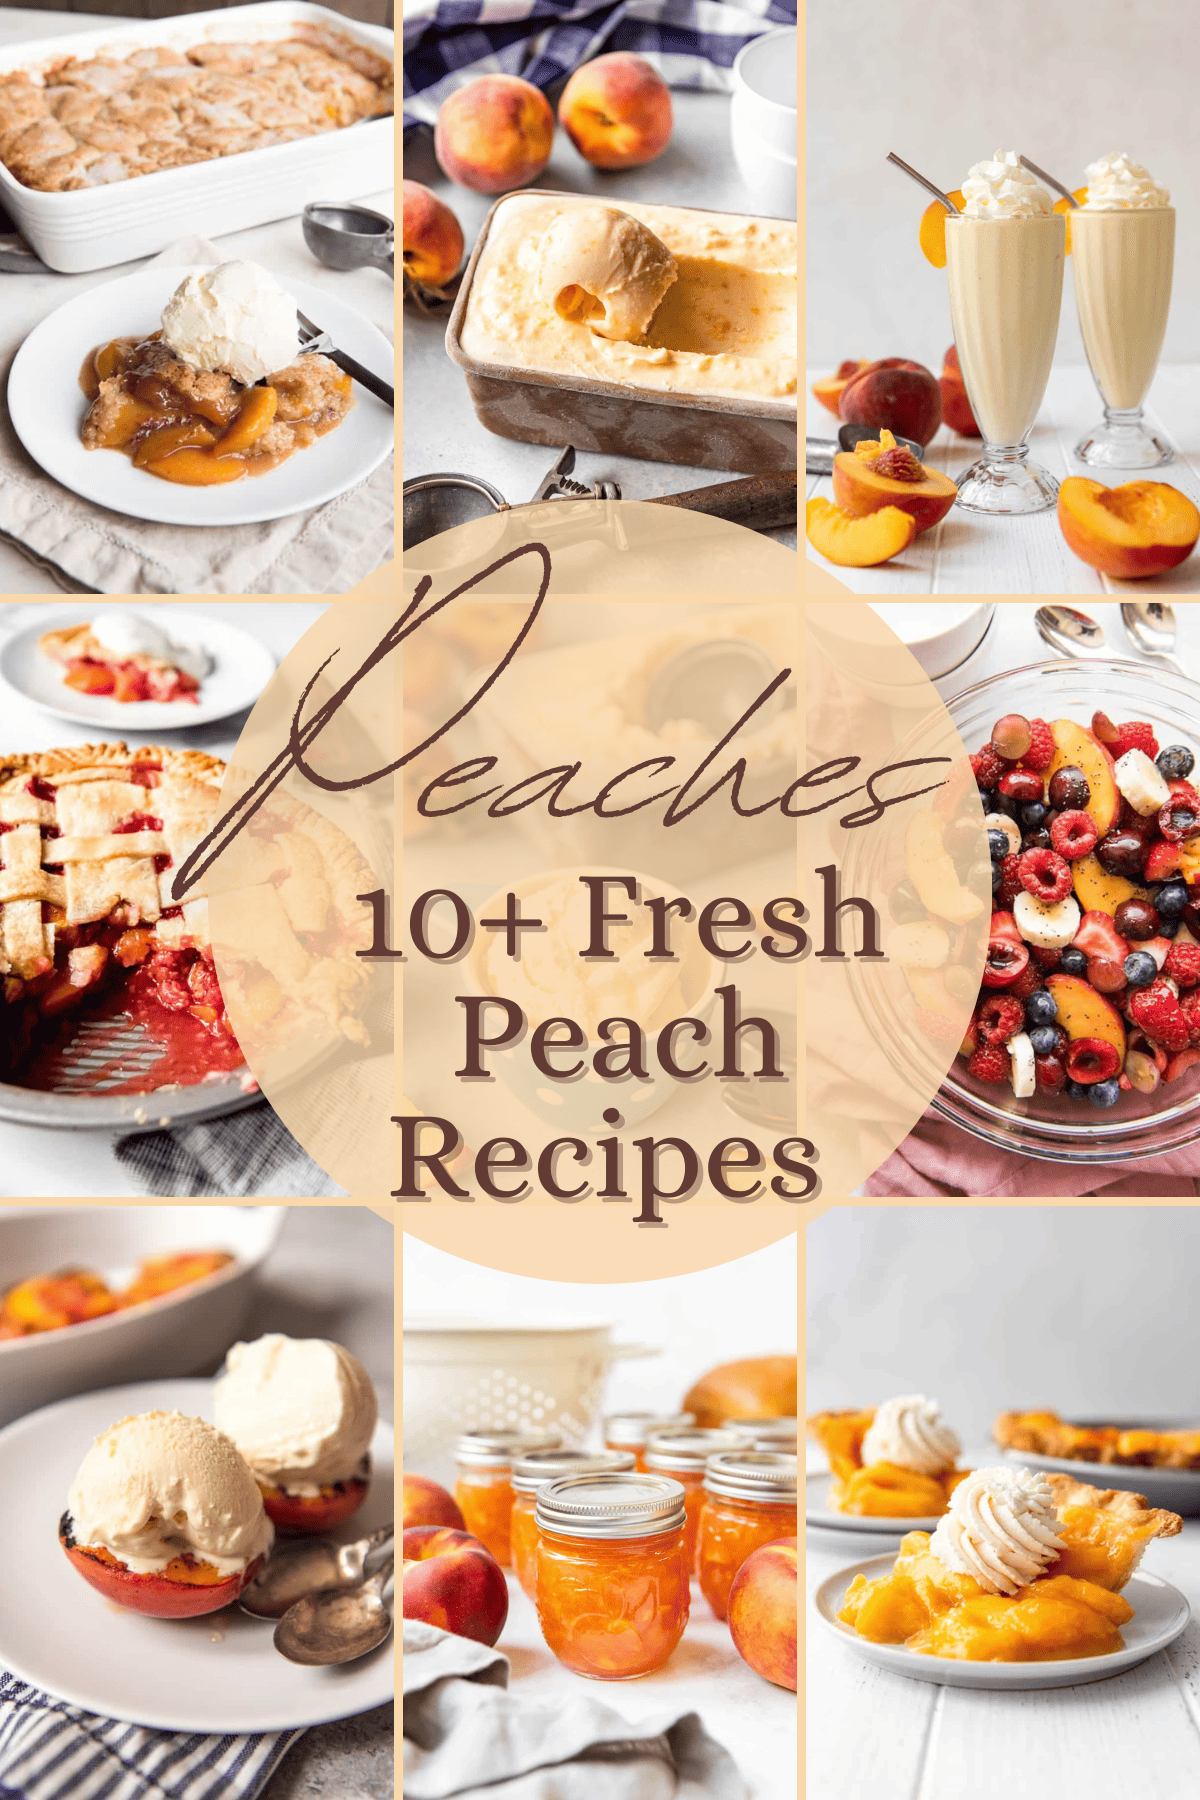 An image of a collage of peach recipes with text overlay.